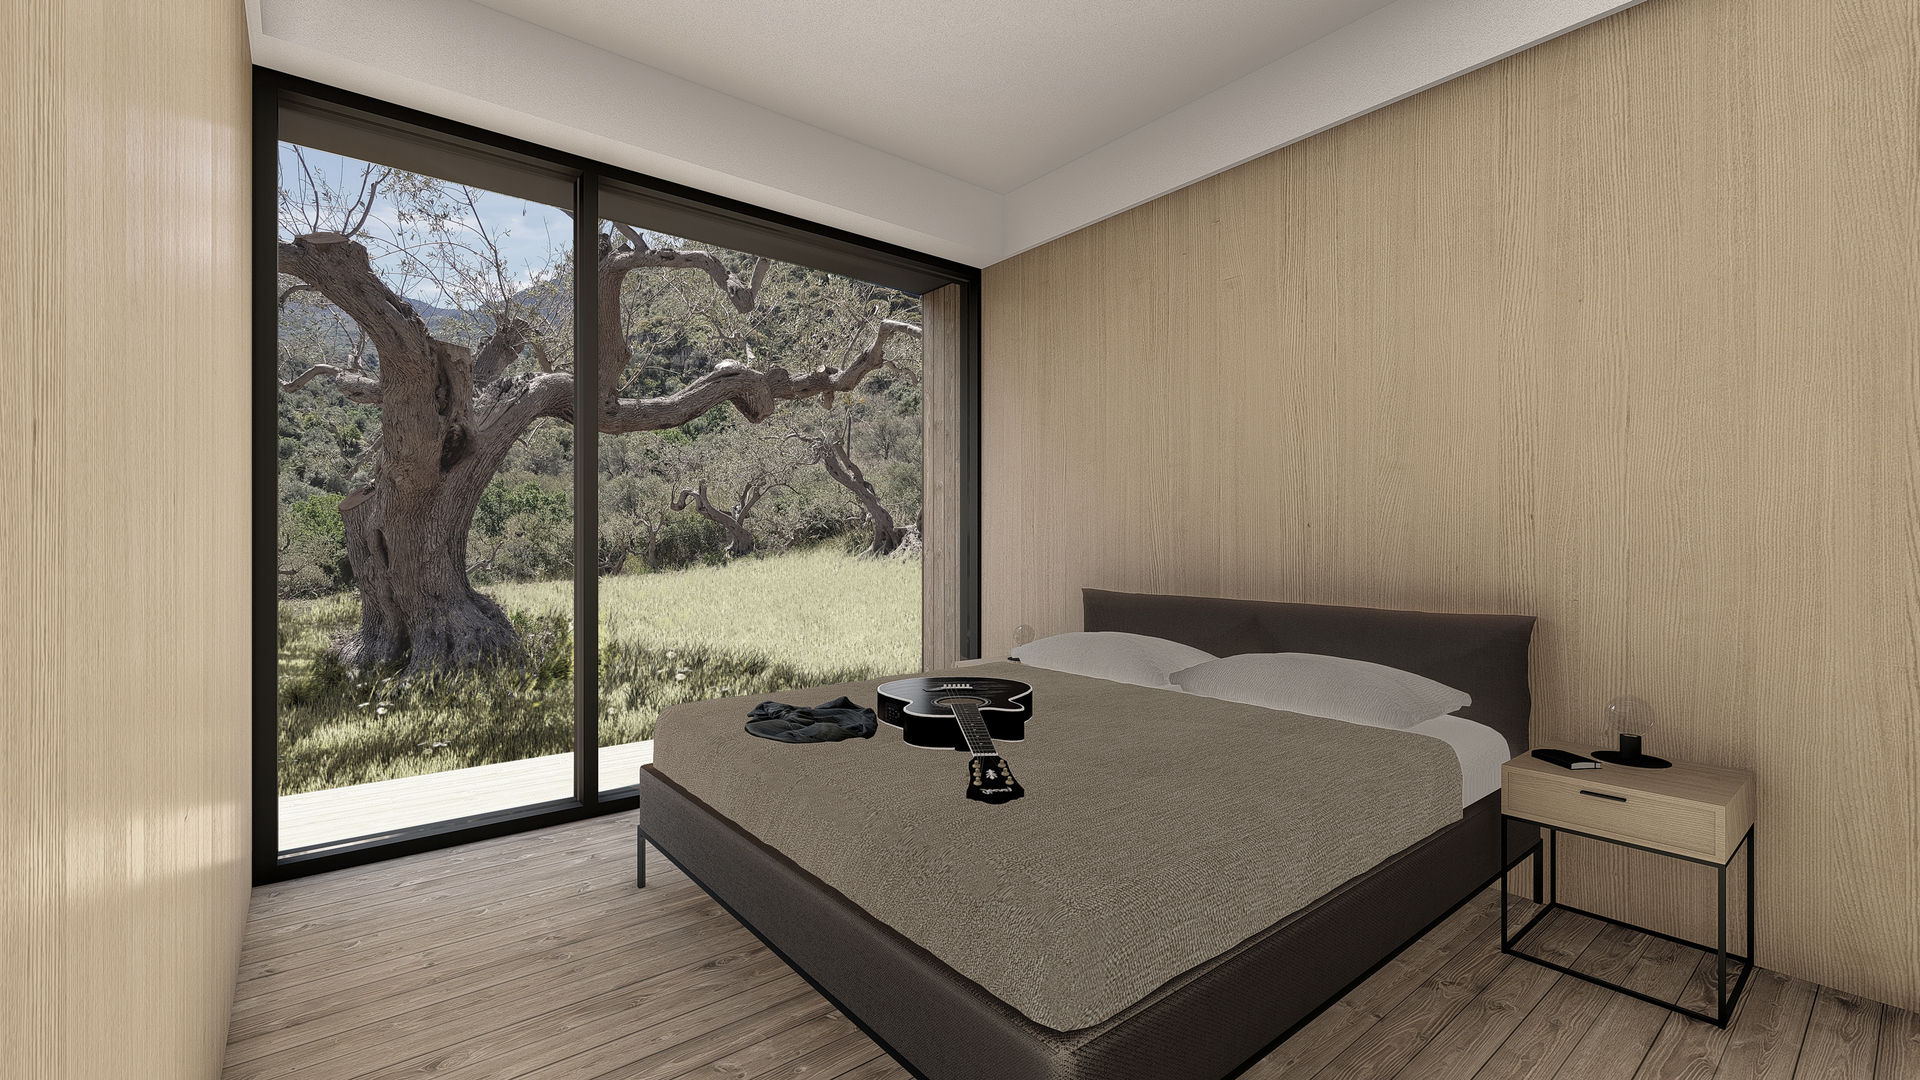 WOODEN HOUSE G|C – SICILY, ALESSIO LO BELLO ARCHITETTO a Palermo ALESSIO LO BELLO ARCHITETTO a Palermo Kamar Tidur Modern Kayu Wood effect king-size bedroom, glass window, room with a view, queen-size bed, double room